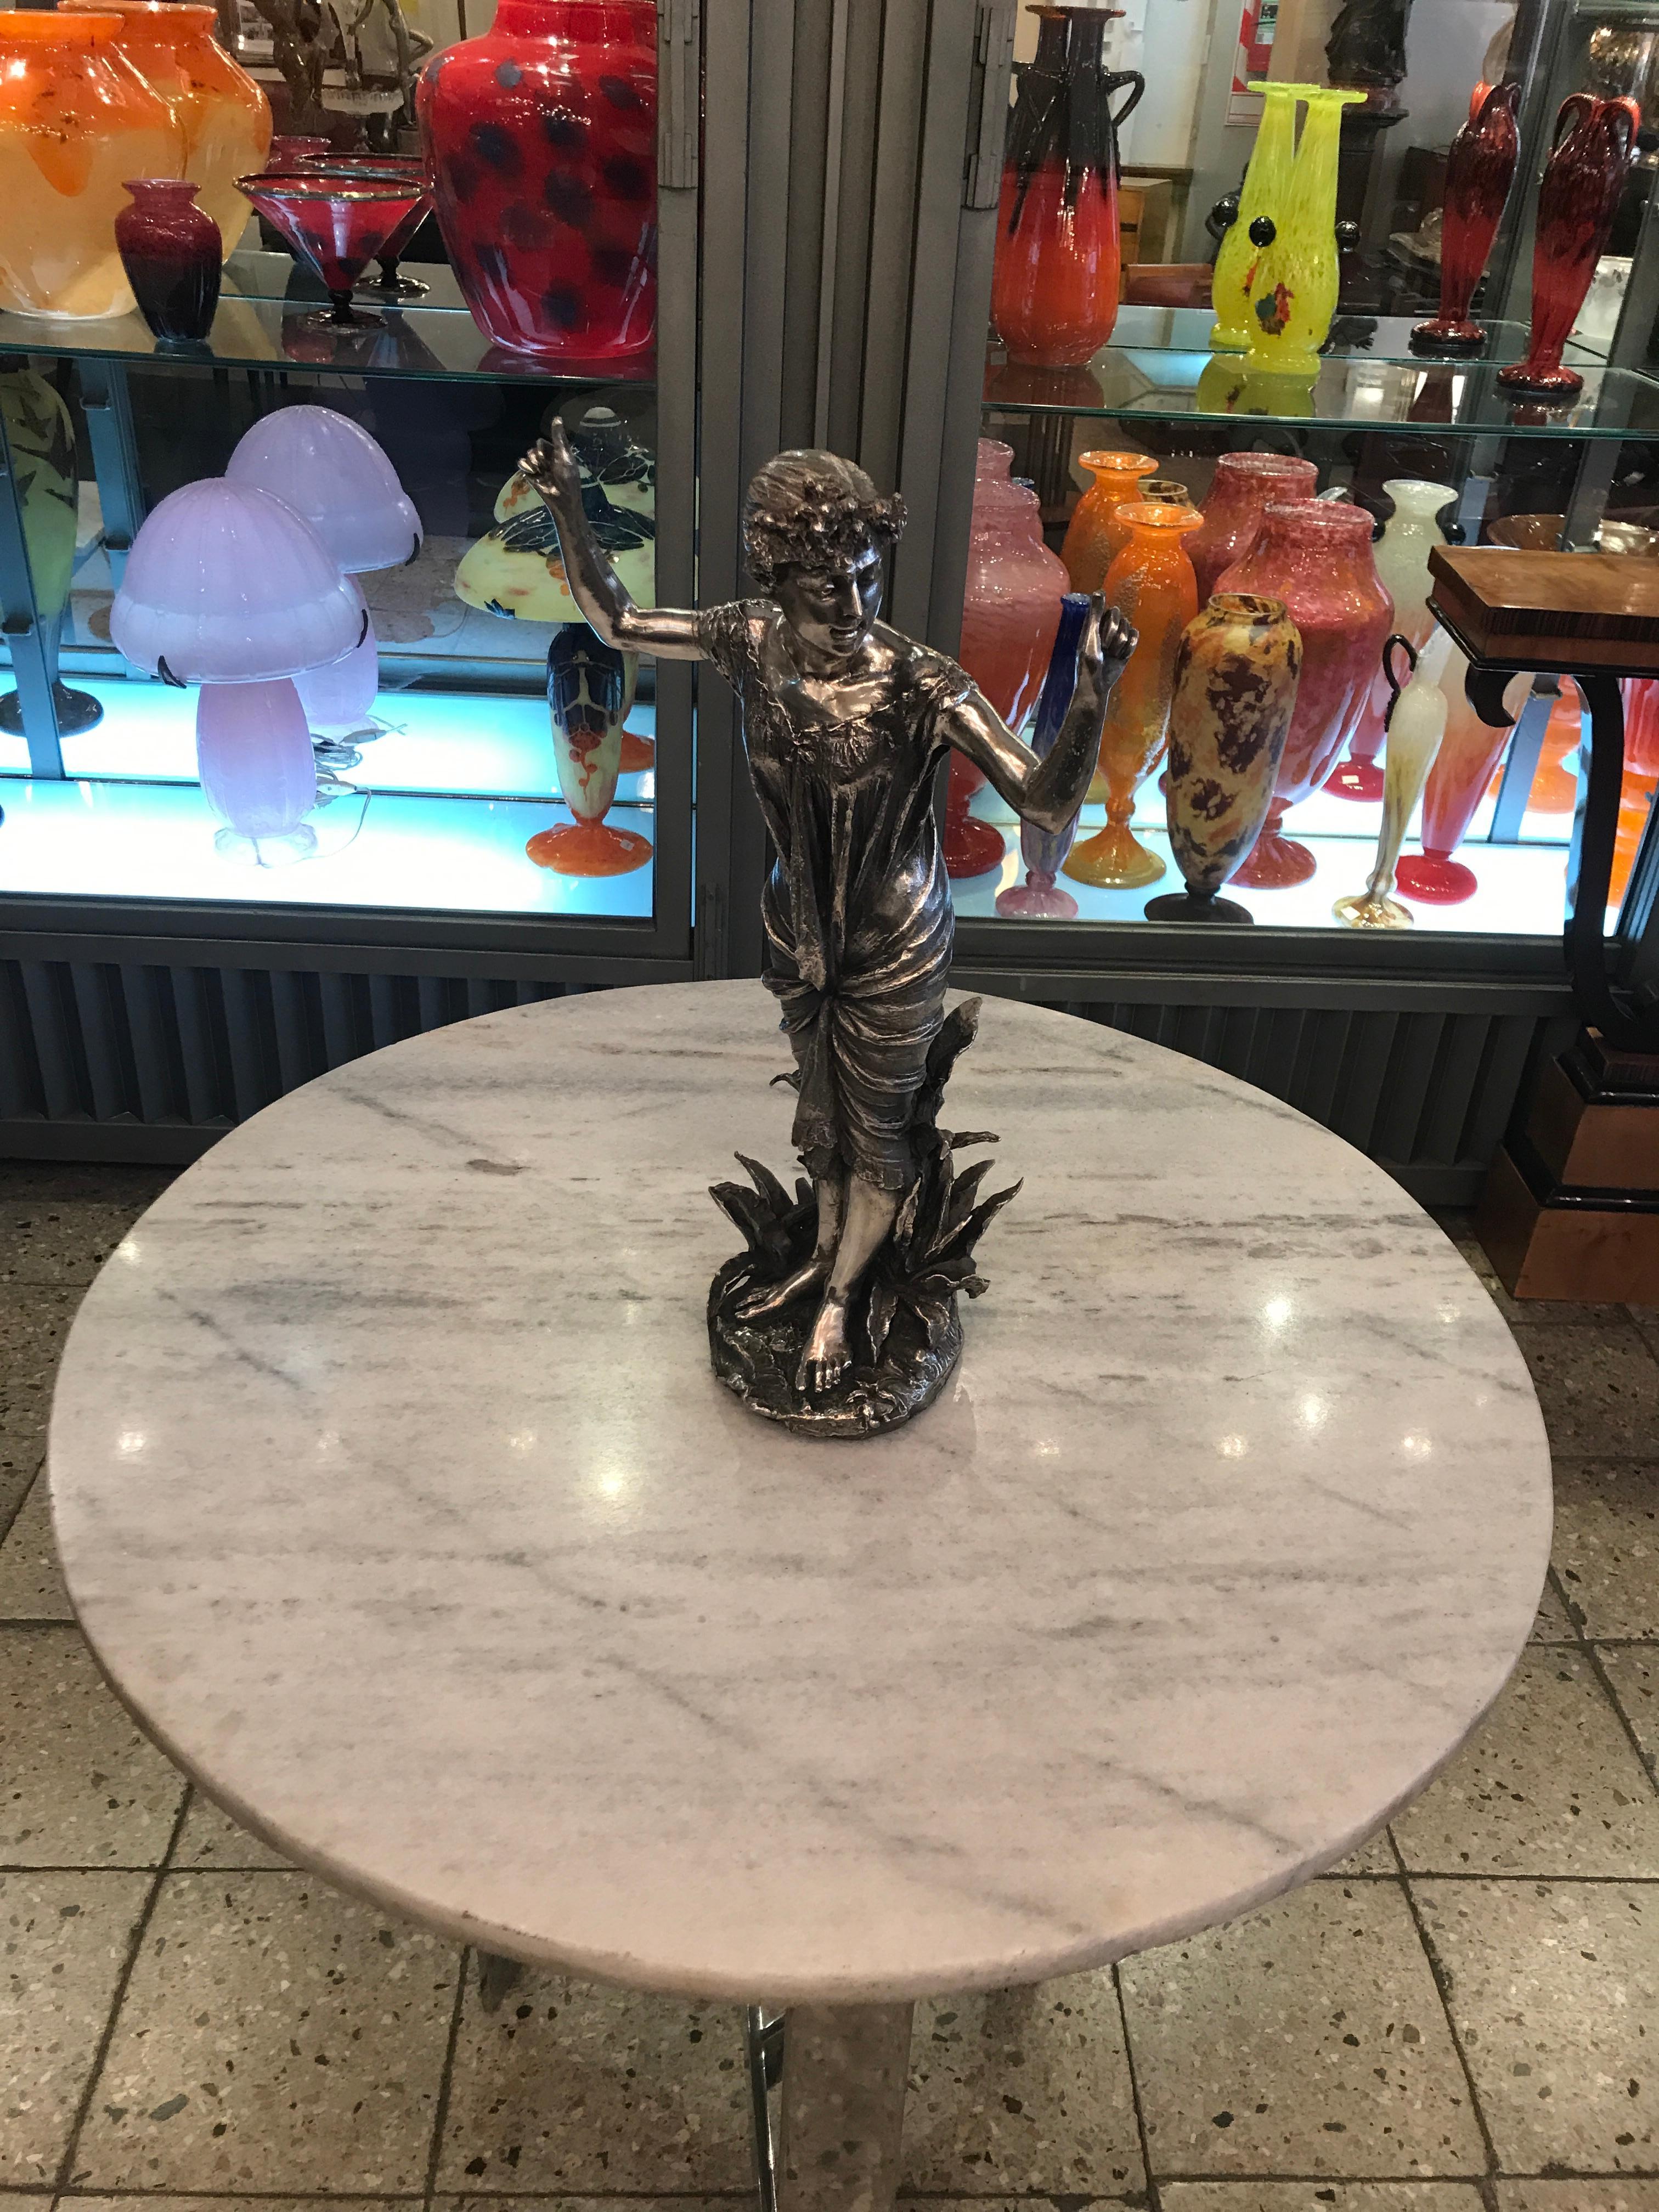 Sculpture
Year: 1900
Material: silver plated bronze
We have specialized in the sale of Art Deco and Art Nouveau and Vintage styles since 1982. If you have any questions we are at your disposal.
Pushing the button that reads 'View All From